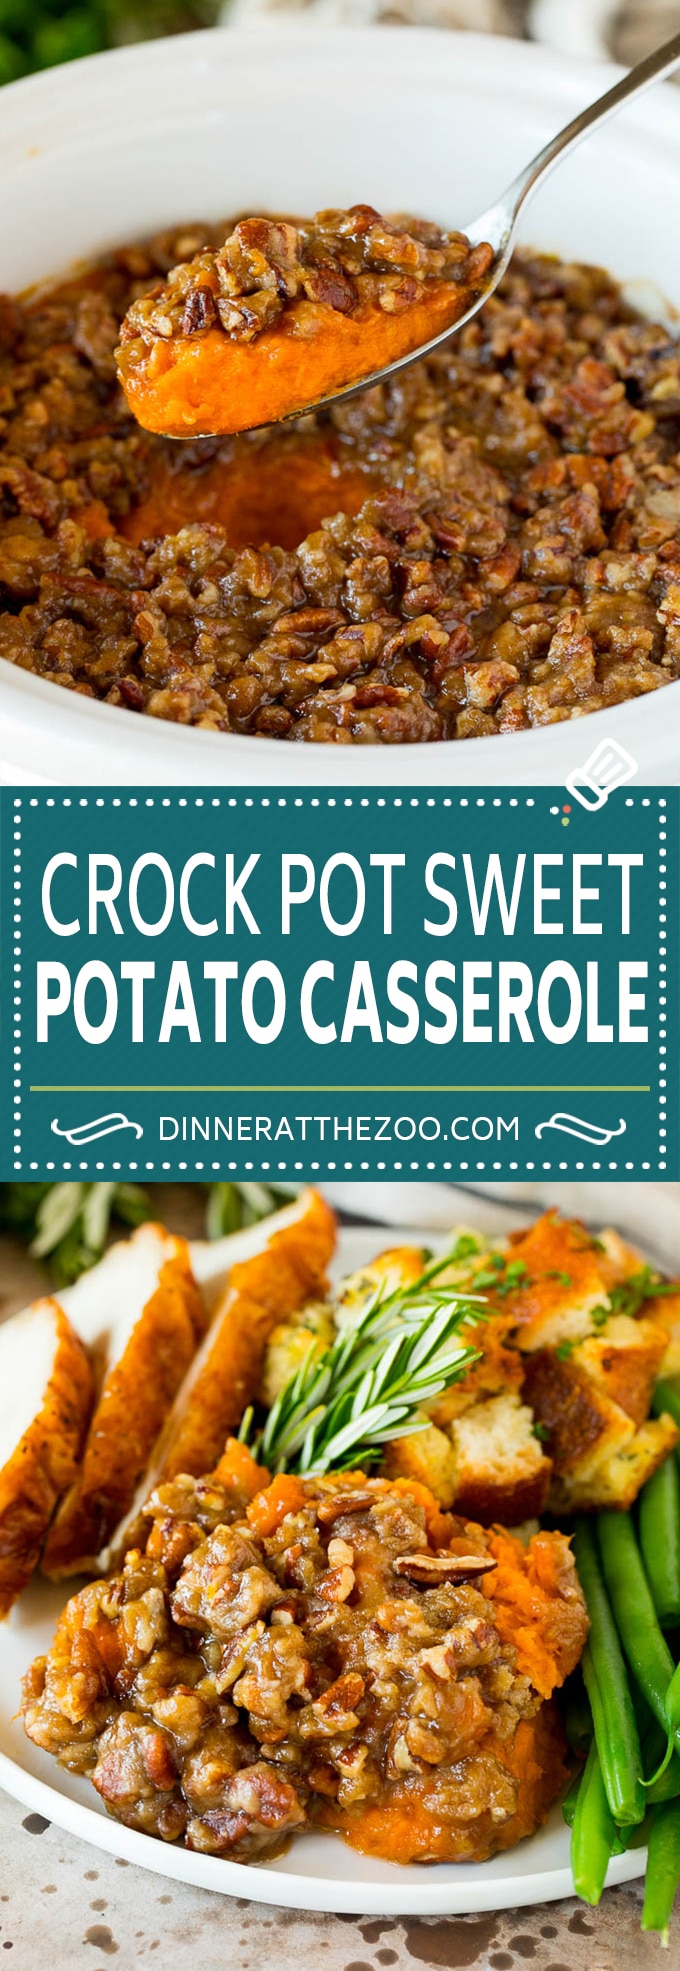 This crock pot sweet potato casserole is yams mashed with sweetener, vanilla and spices, then finished off with a brown sugar pecan topping.